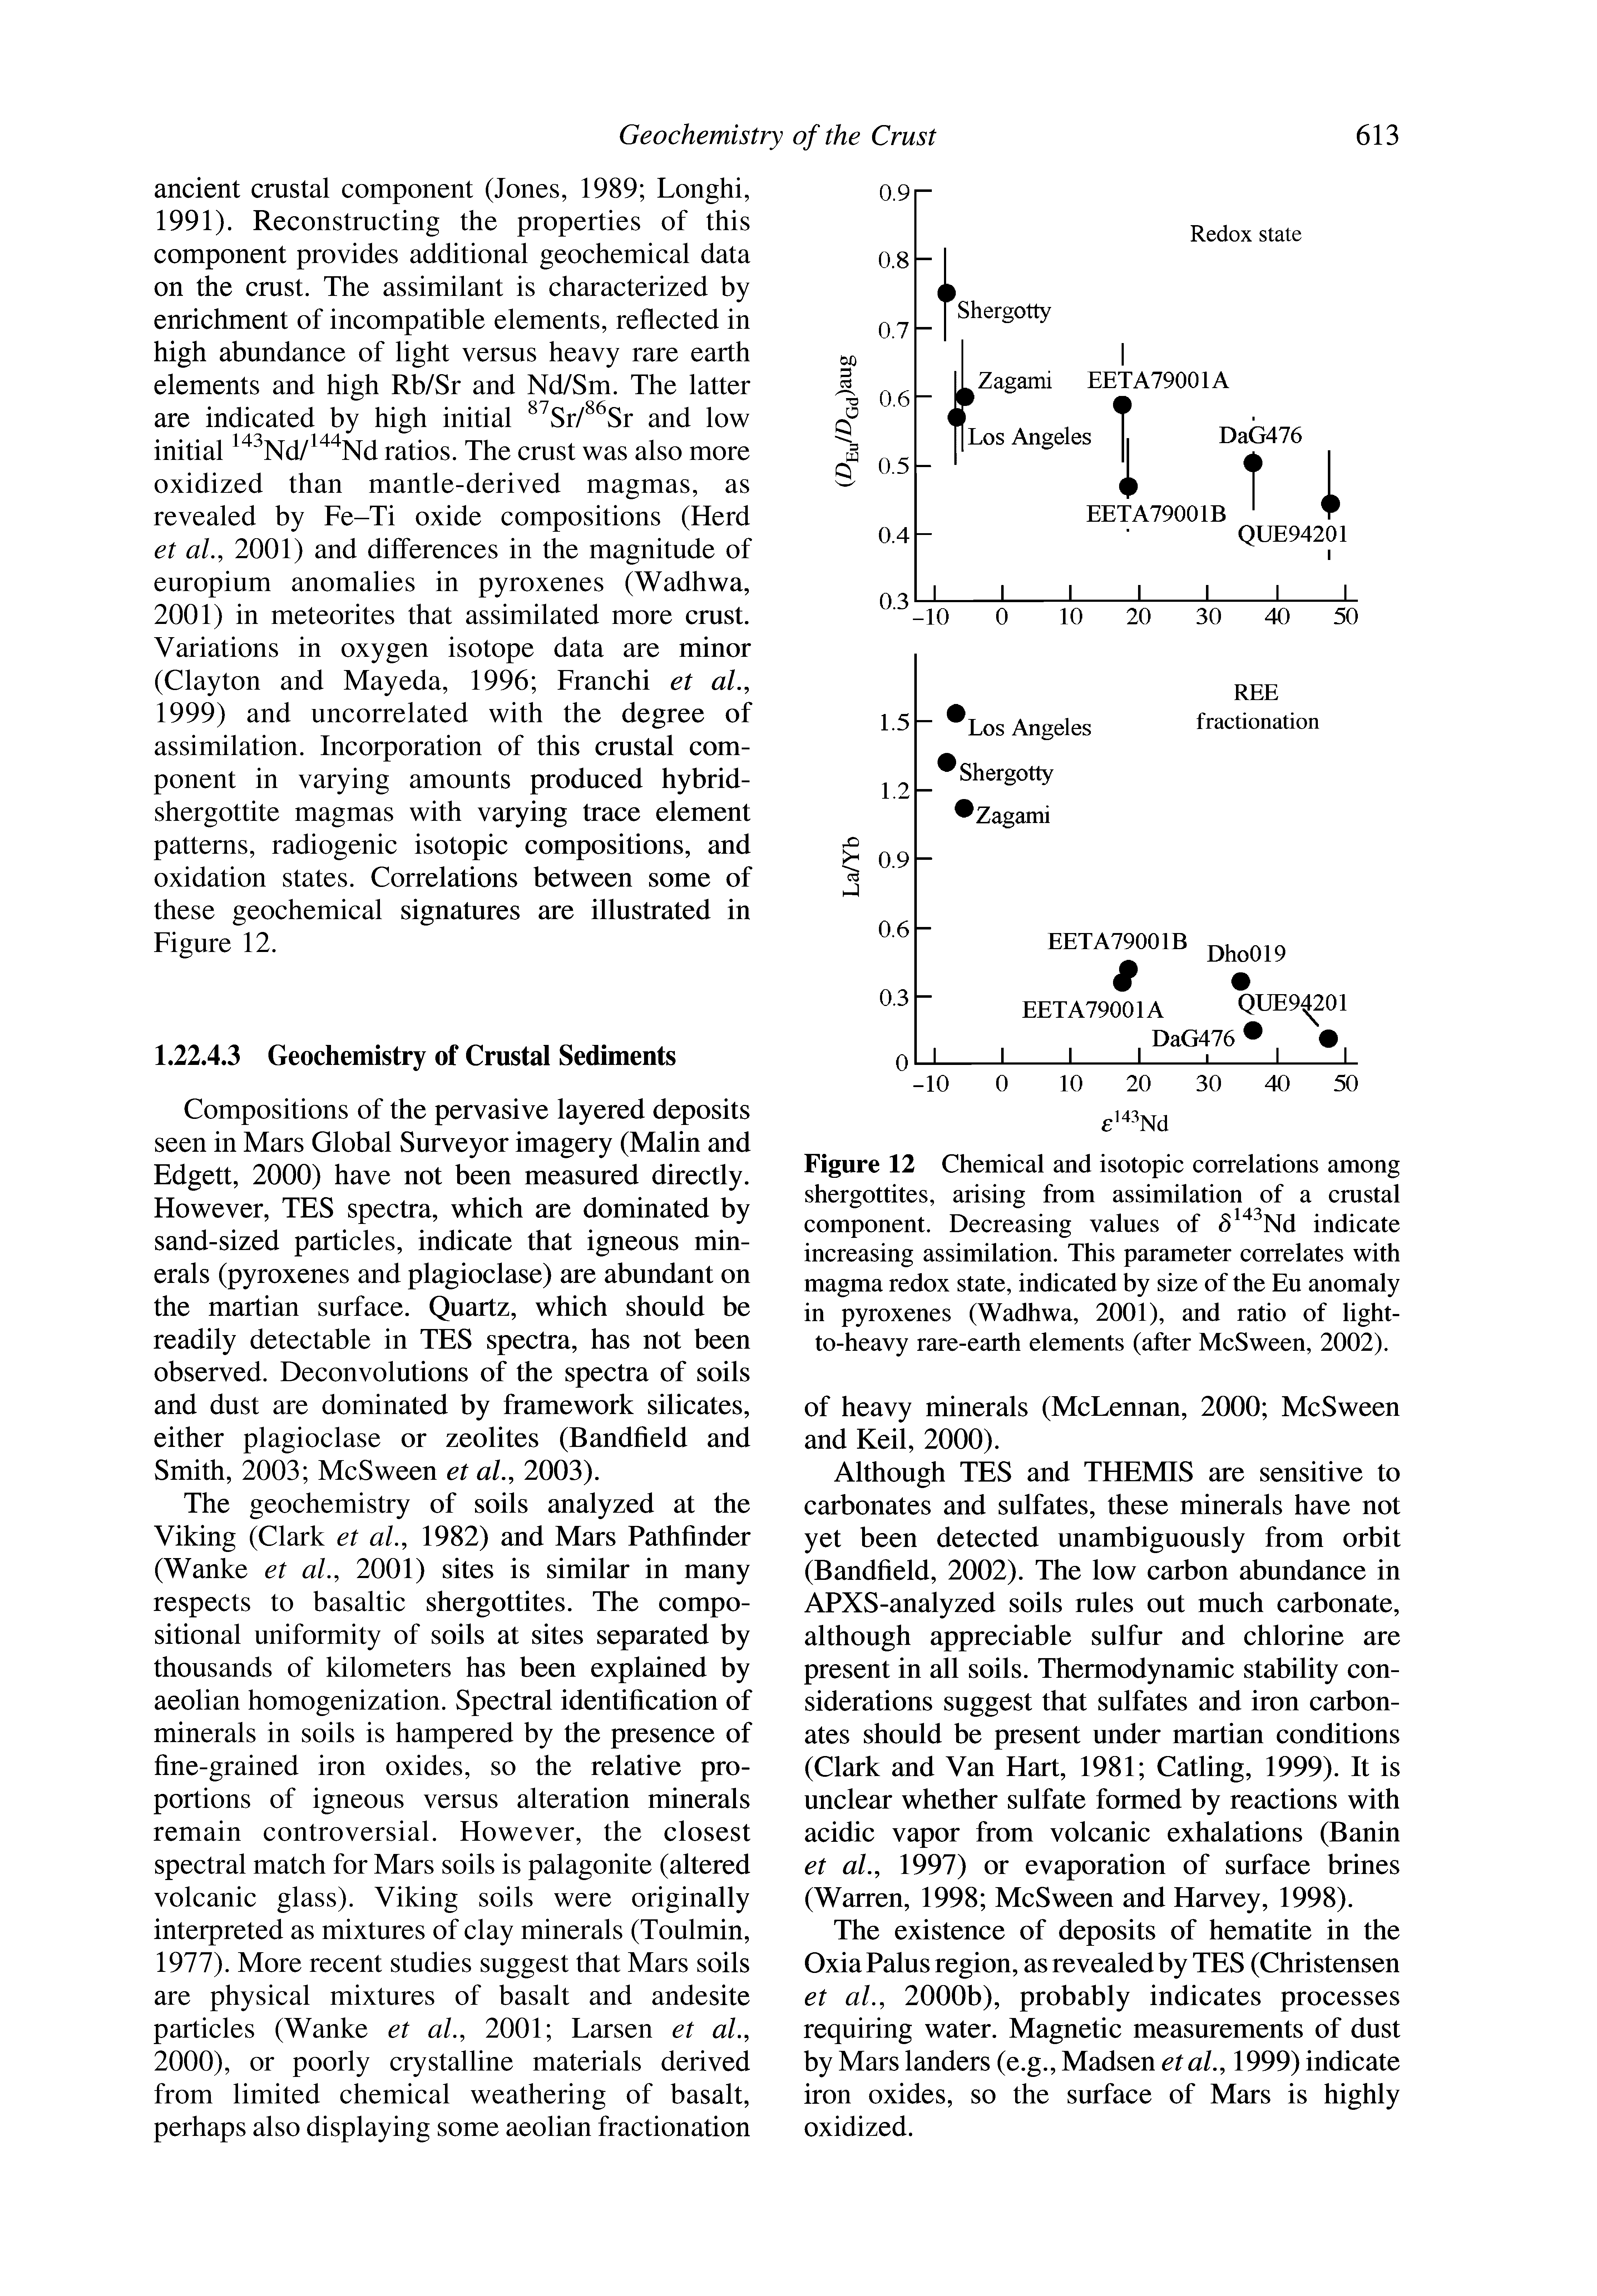 Figure 12 Chemical and isotopic correlations among shergottites, arising from assimilation of a crustal component. Decreasing values of 5 " Nd indicate increasing assimilation. This parameter correlates with magma redox state, indicated by size of the Eu anomaly in pyroxenes (Wadhwa, 2001), and ratio of light-to-heavy rare-earth elements (after McSween, 2002).